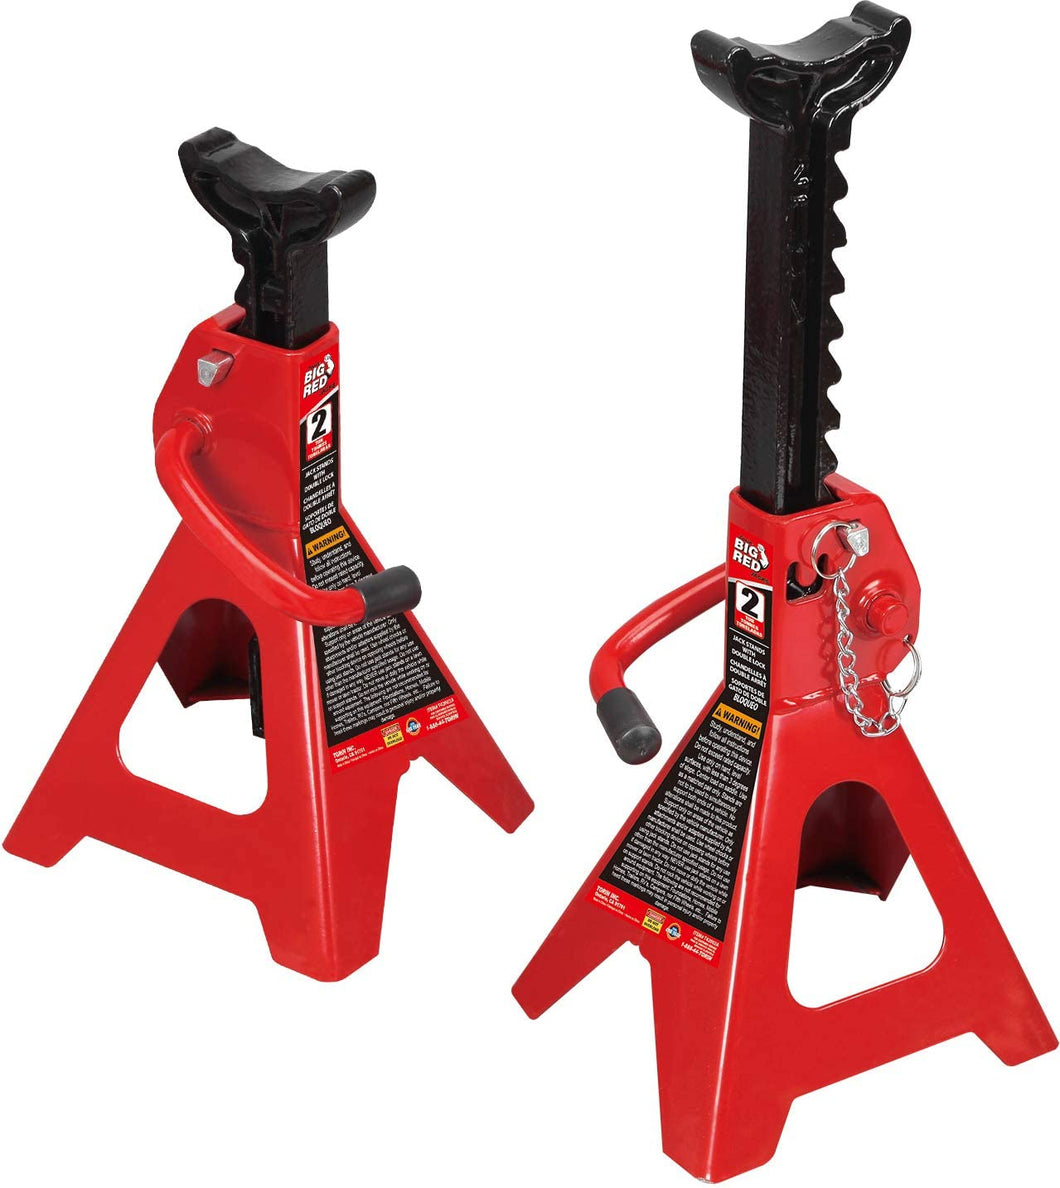 BIG RED Torin Steel Jack Stands: Double Locking